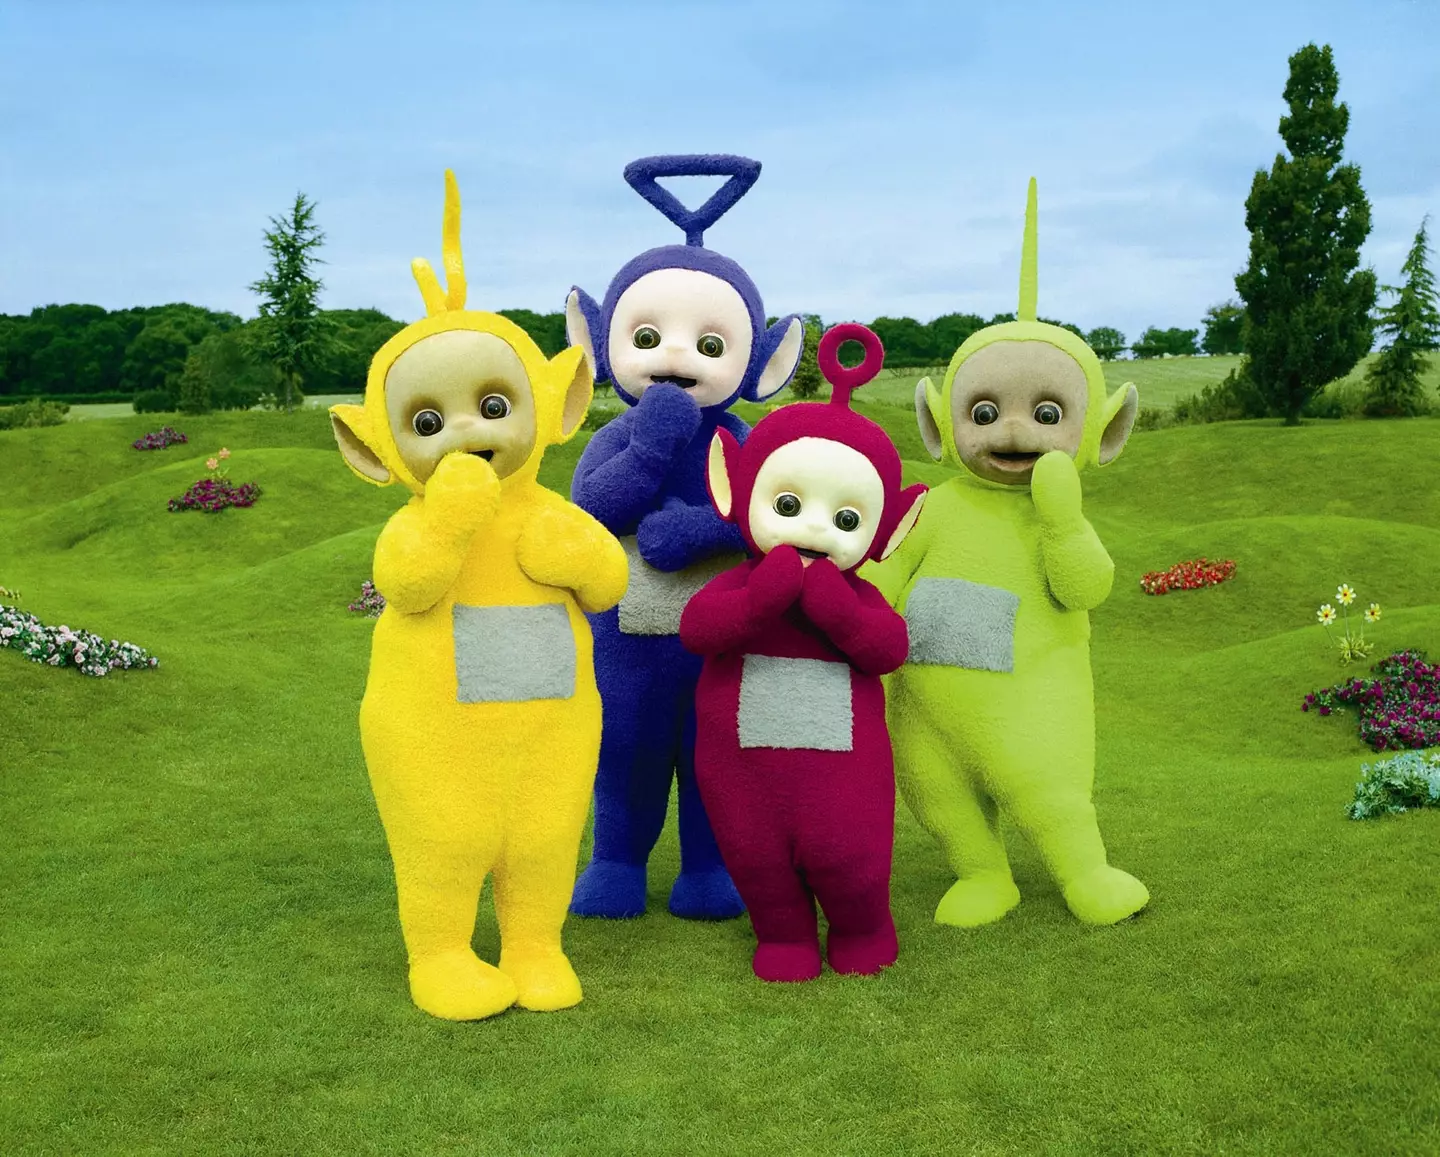 A$AP Rocky revealed how the Teletubbies have inspired him.